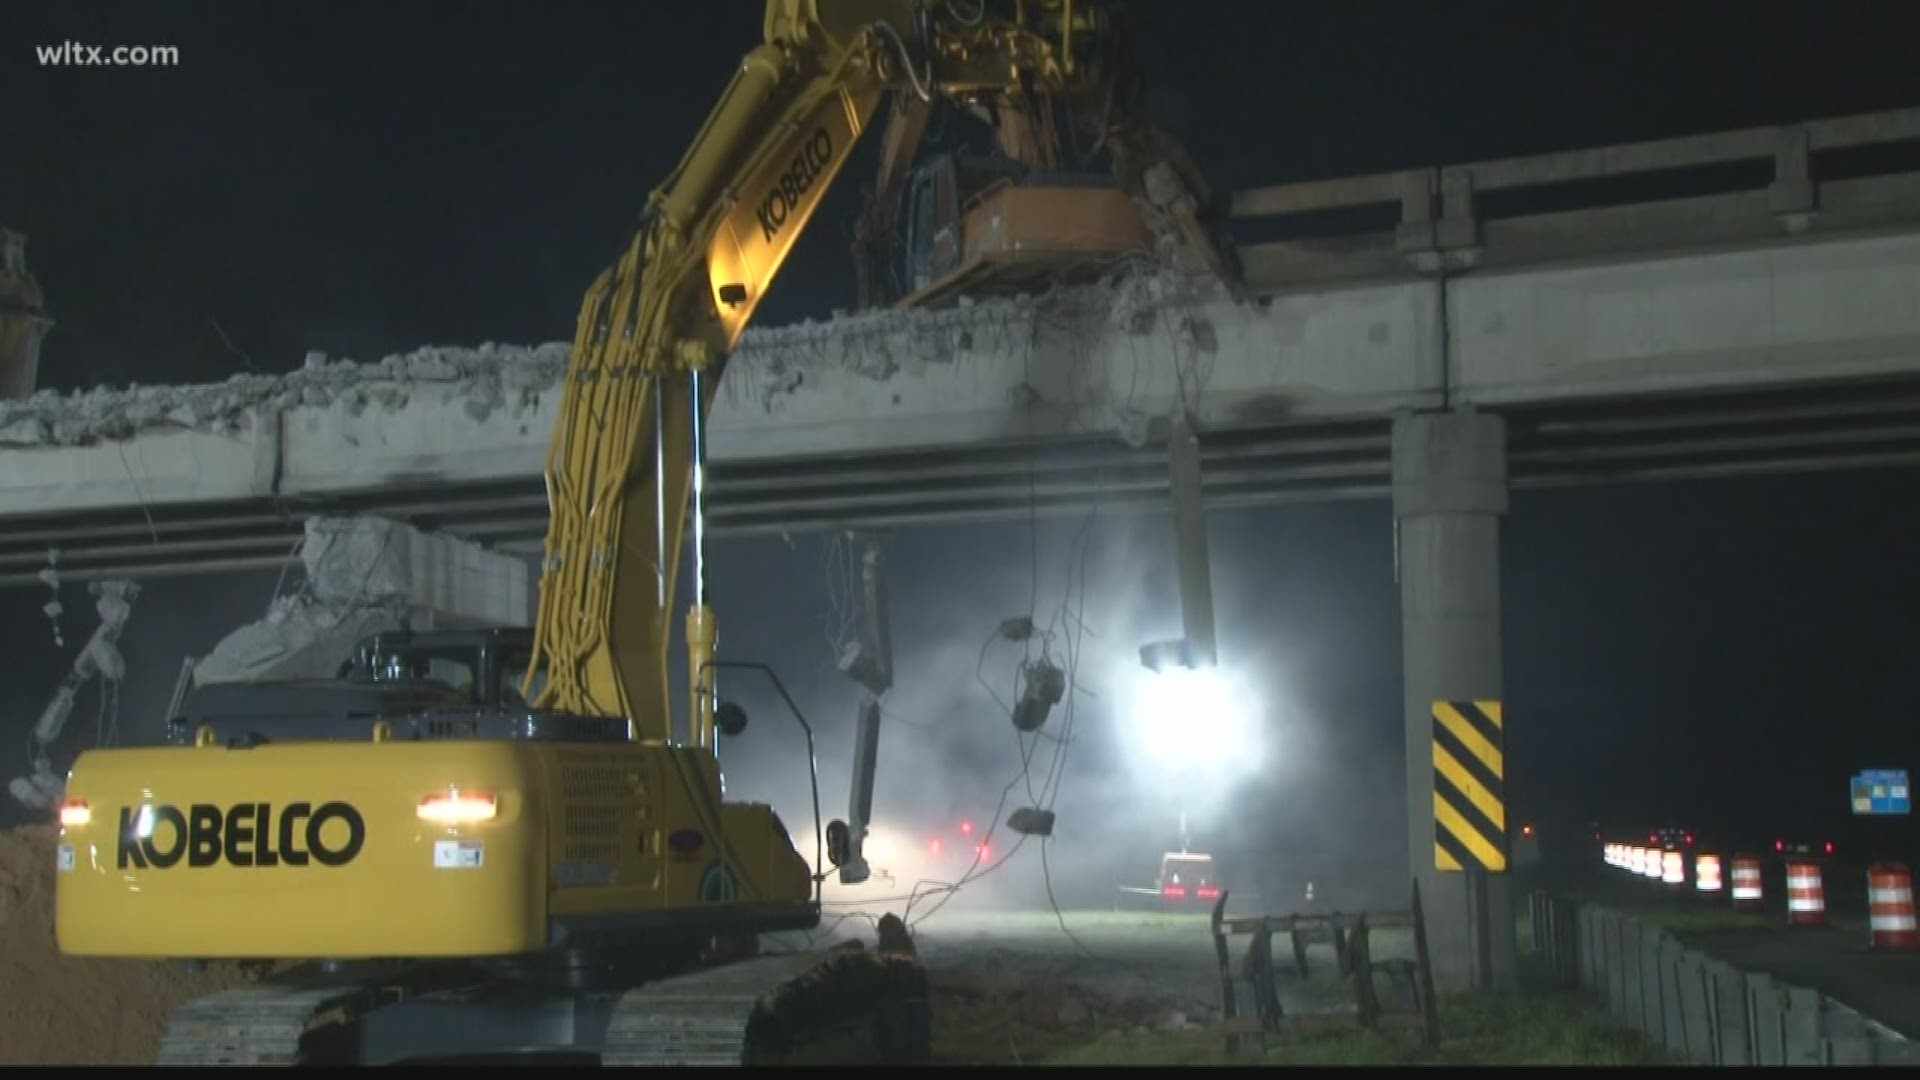 After more than a year of being closed, a bridge in Orangeburg is about to reopen.